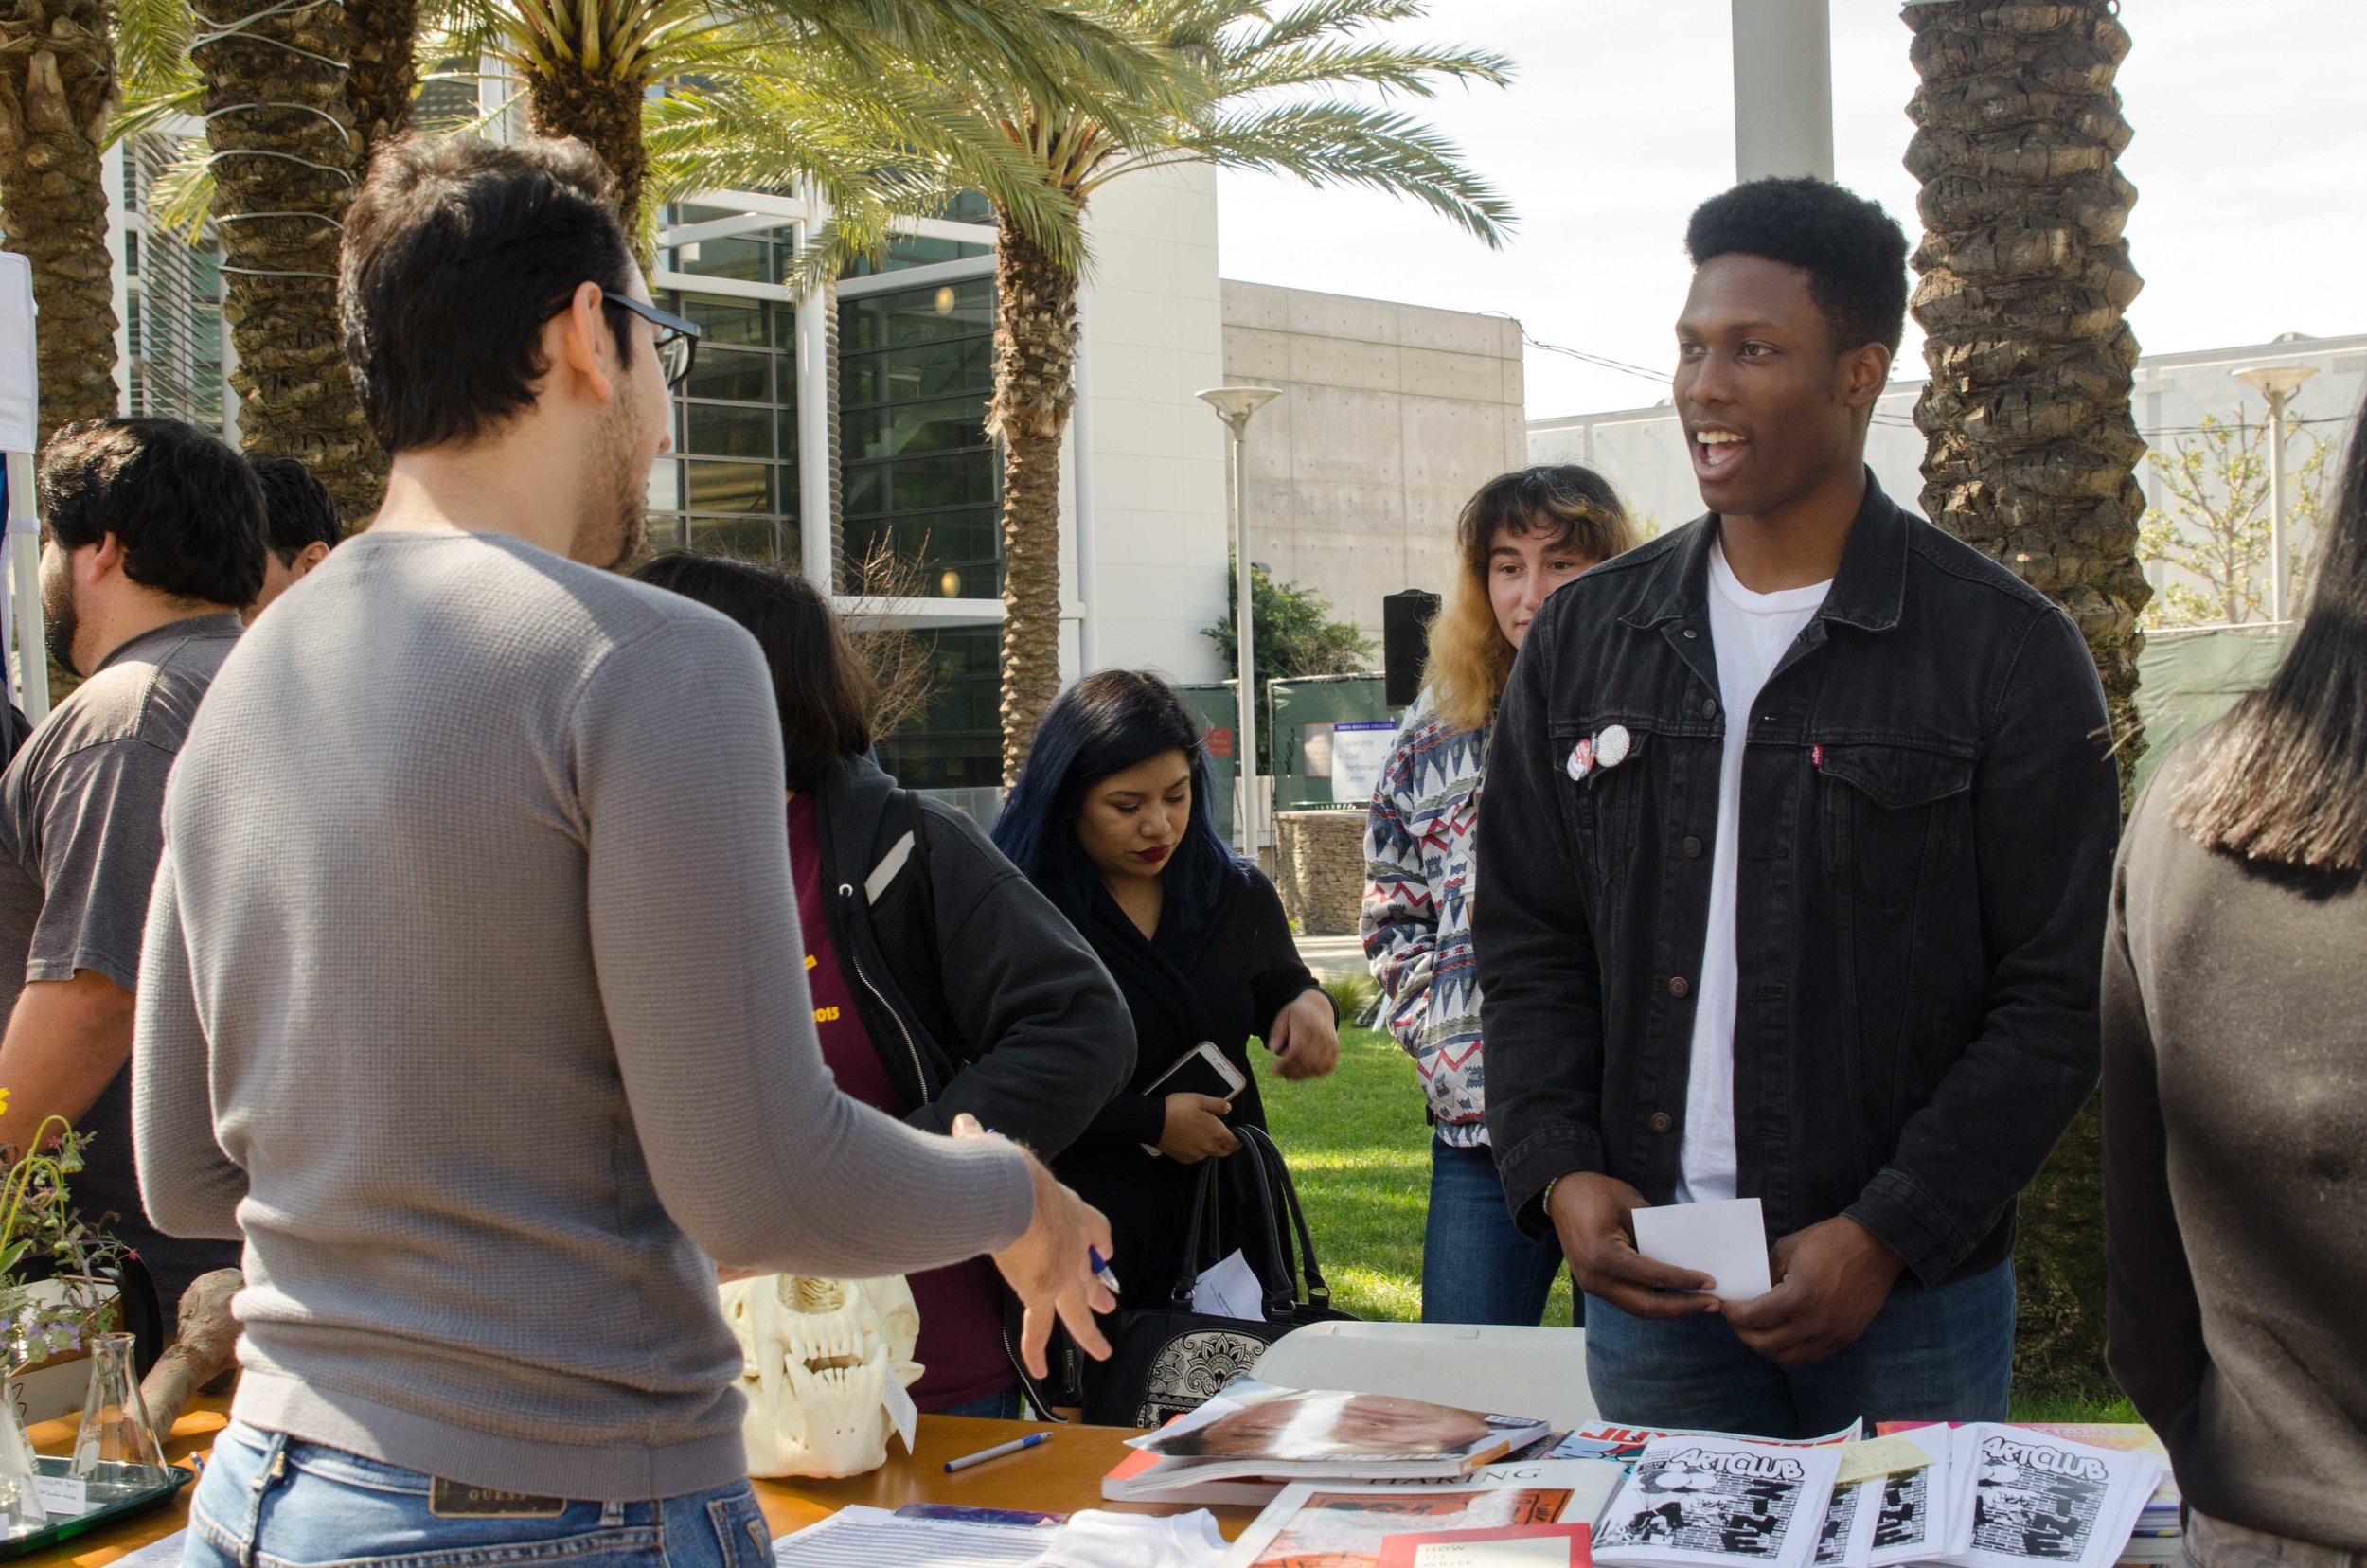  Gozie Ojini(Right) recruiting Santa Monica College Students for the Art Club at Club Awareness Day at Santa Monica College in Santa Monica, California on March 14, 2017 (Photo By: Diana Parra Garcia) 